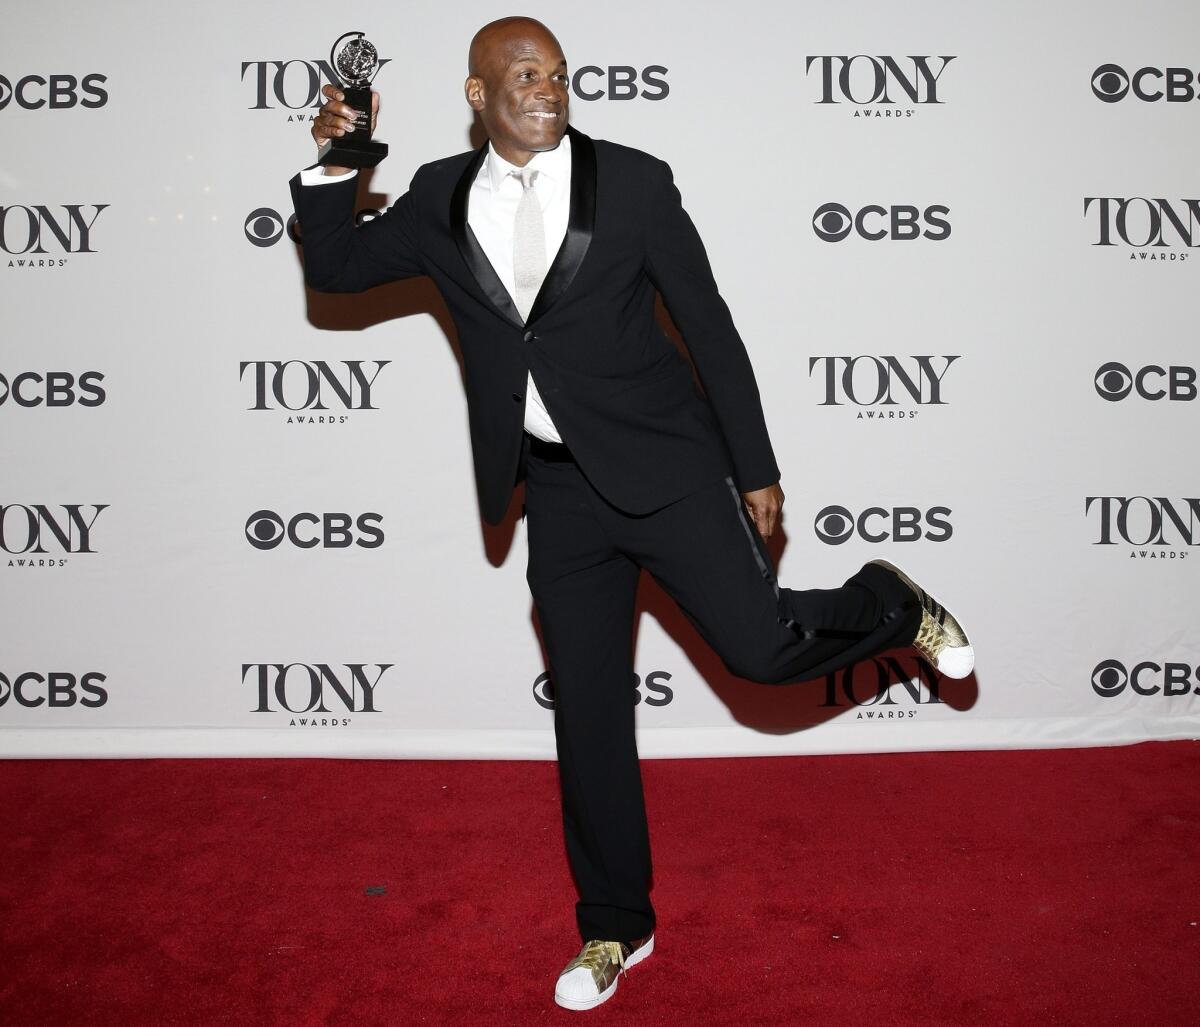 Director Kenny Leon shows off his Tony Award for best direction of a play for "A Raisin in the Sun."